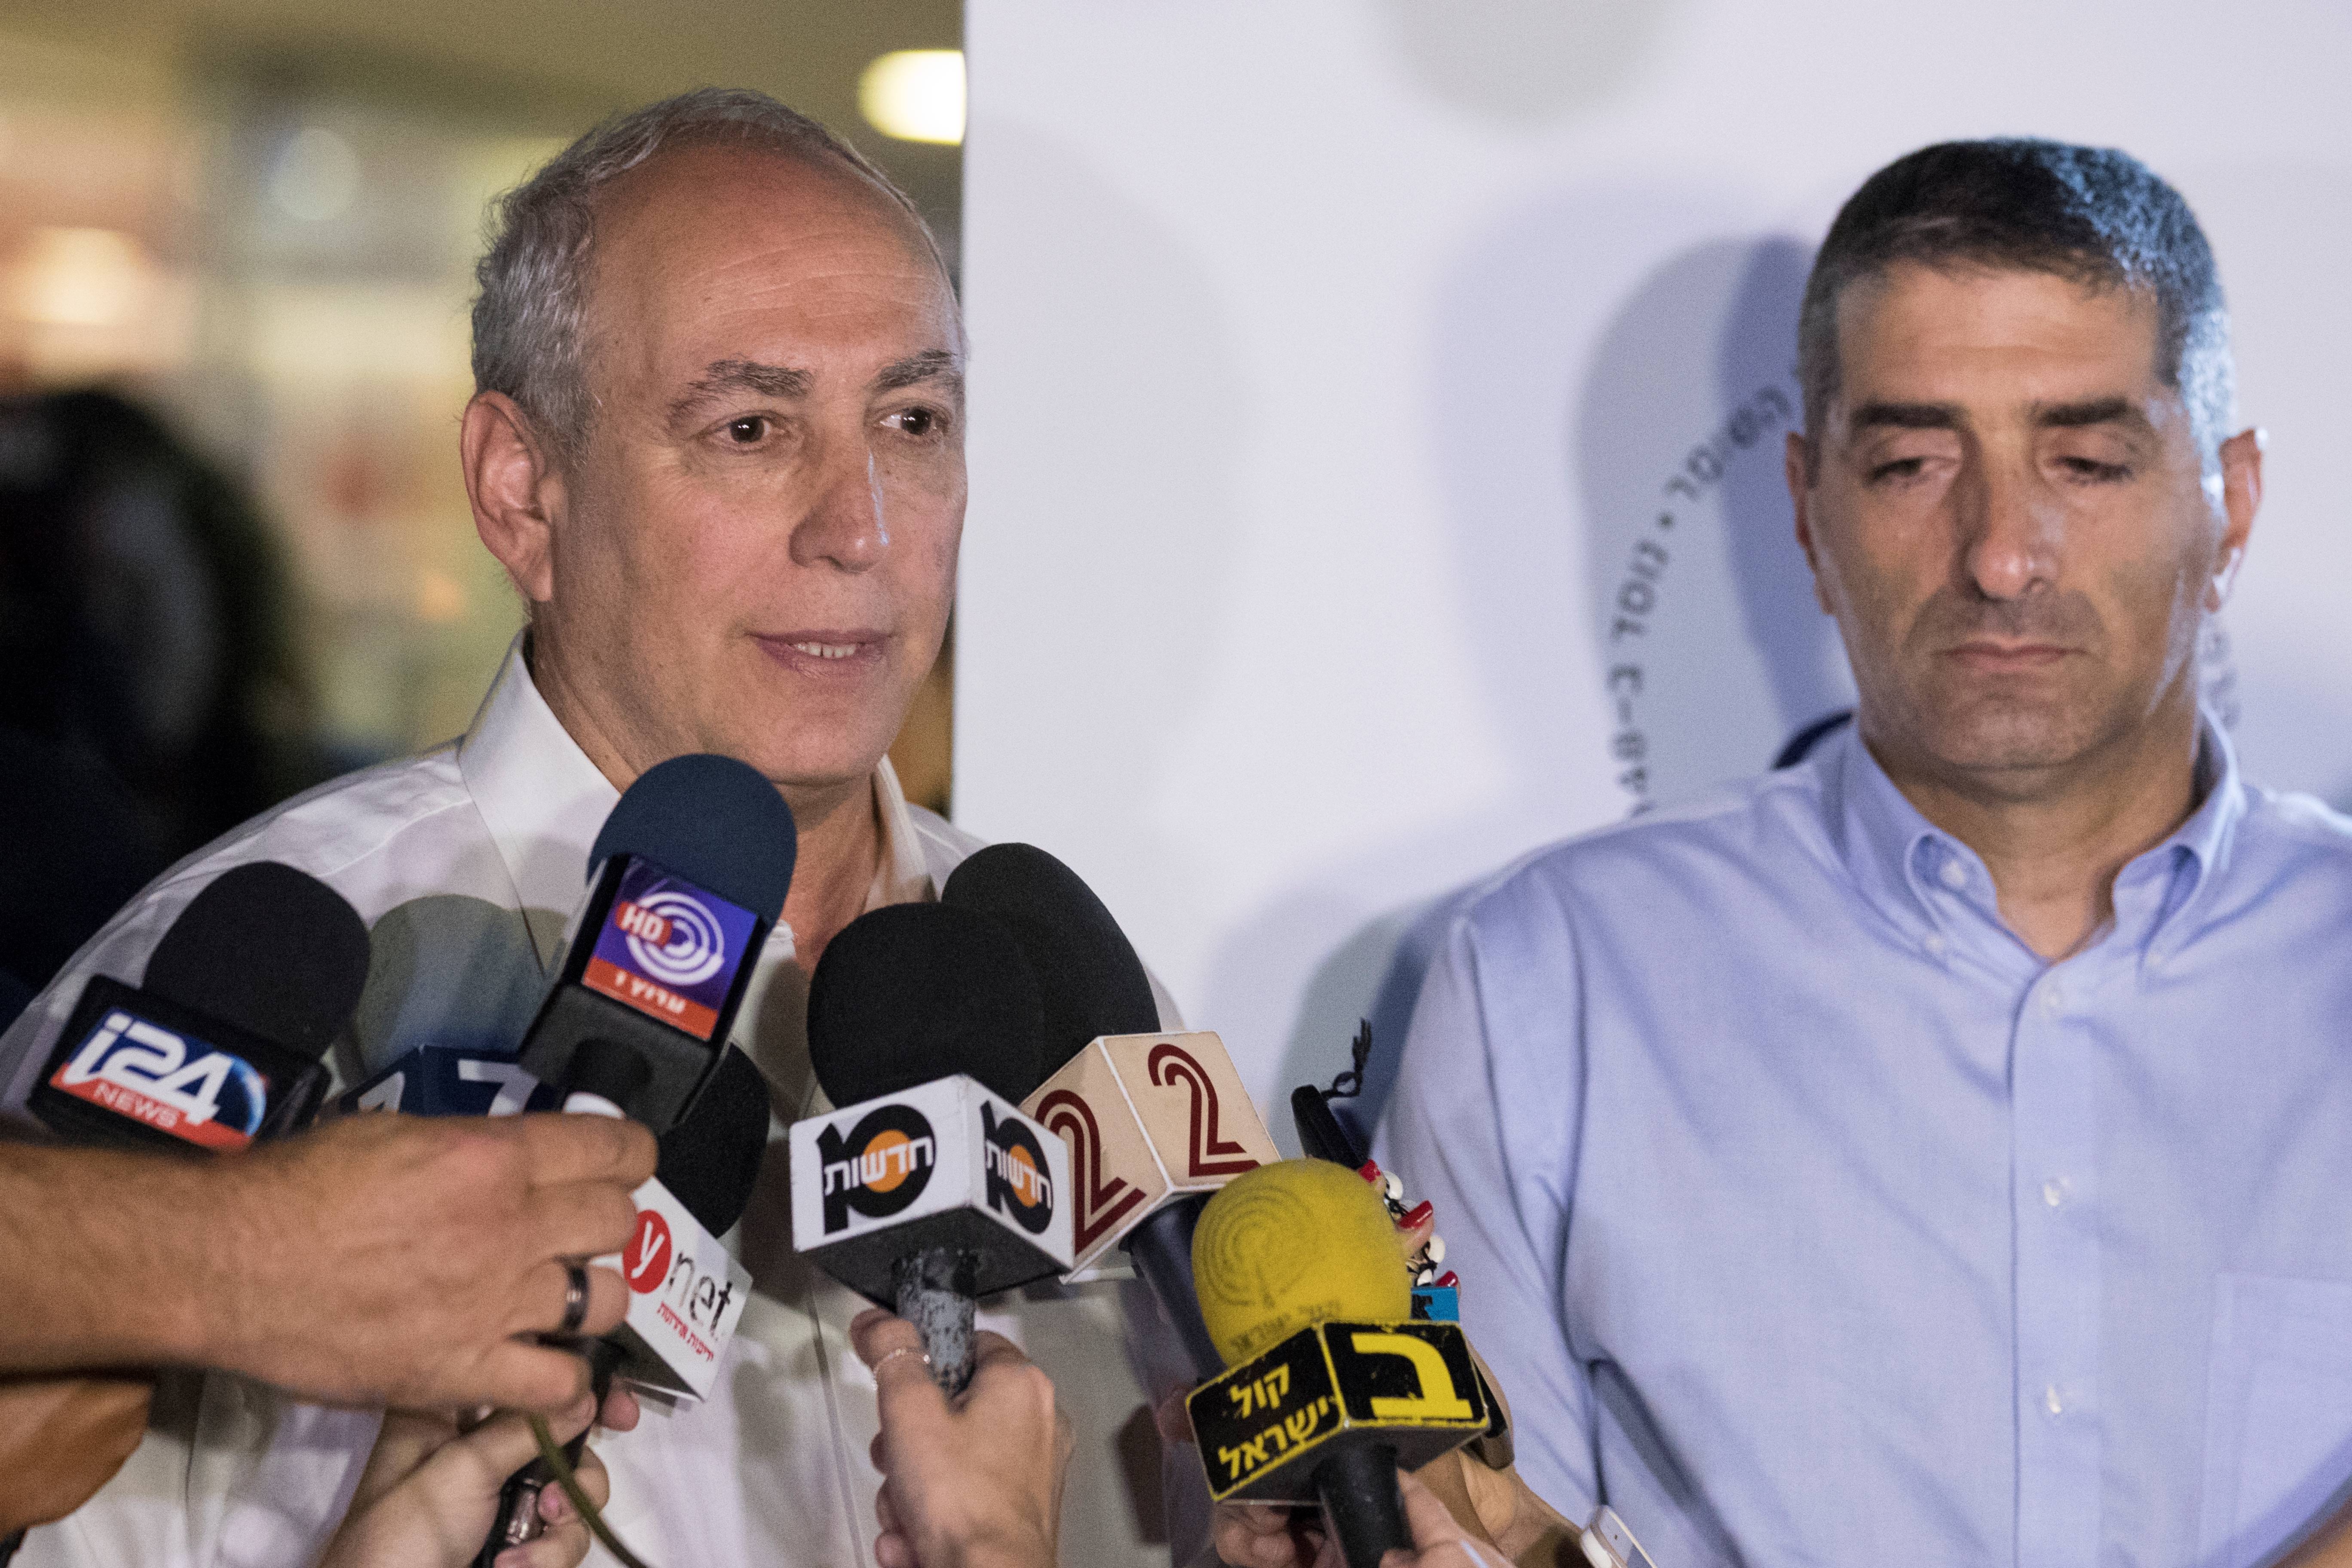 Hemi Peres (L), the son of former Israeli president Shimon Peres, talks to journalists outside the Sheba Medical Centre at Tel HaShomer near the coastal Israeli city of Tel Aviv on September 13, 2016. Israel's ex-president and Nobel Peace Prize winner Shimon Peres suffered a stroke and the 93-year-old was being treated at a hospital near Tel Aviv, his office said. Peres was admitted to Sheba Medical Centre at Tel HaShomer "after suffering a stroke," his office said in a statement. / AFP PHOTO / JACK GUEZ